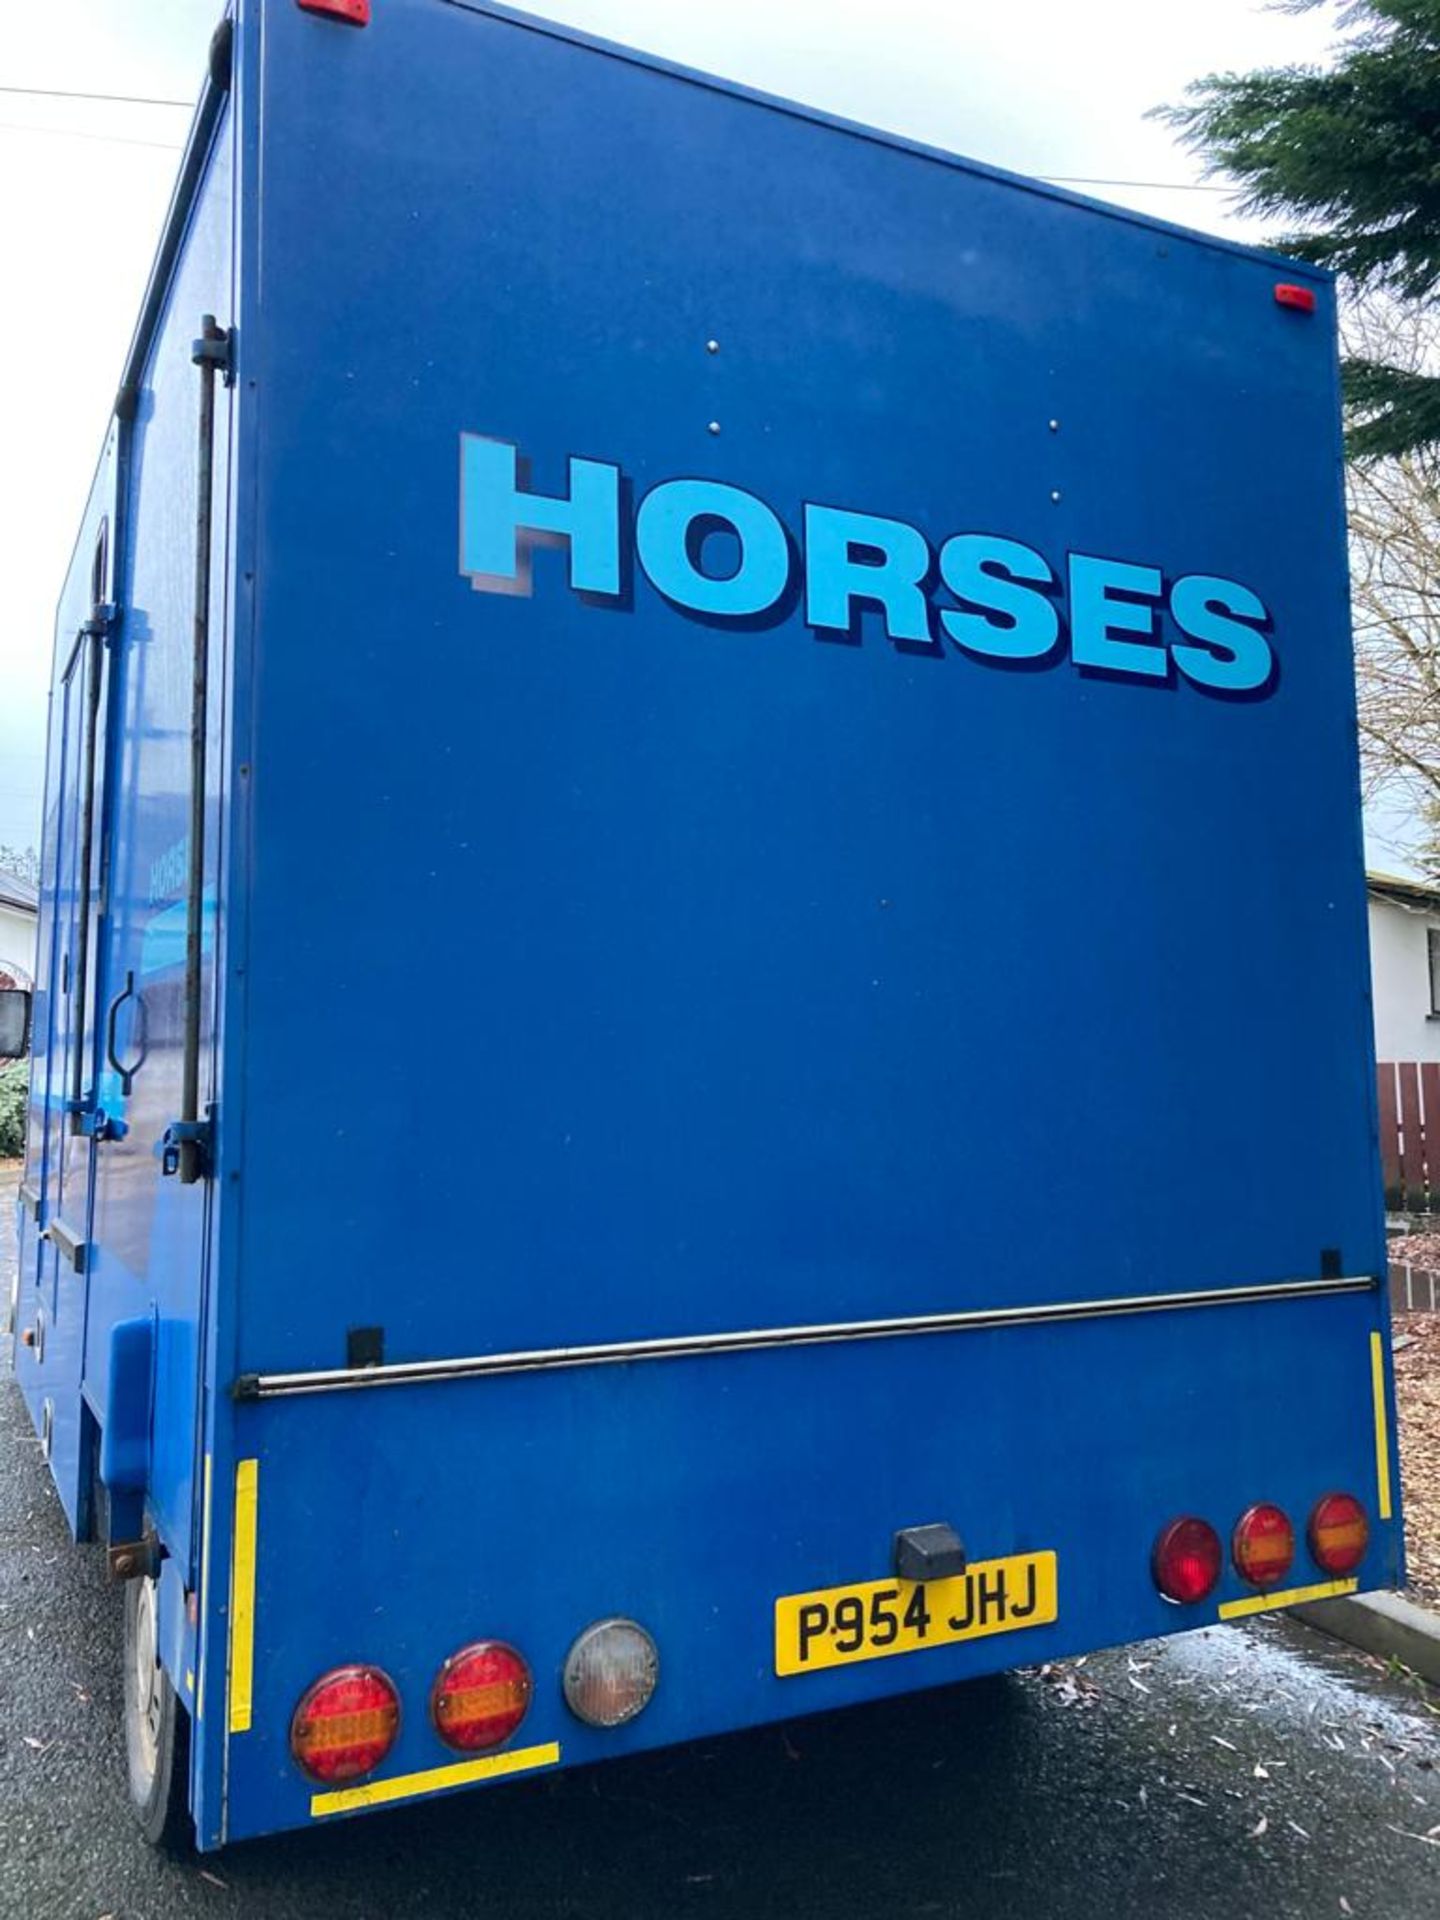 IVECO TWO HORSEBOX.LOCATION NORTHERN IRELAND - Image 3 of 10